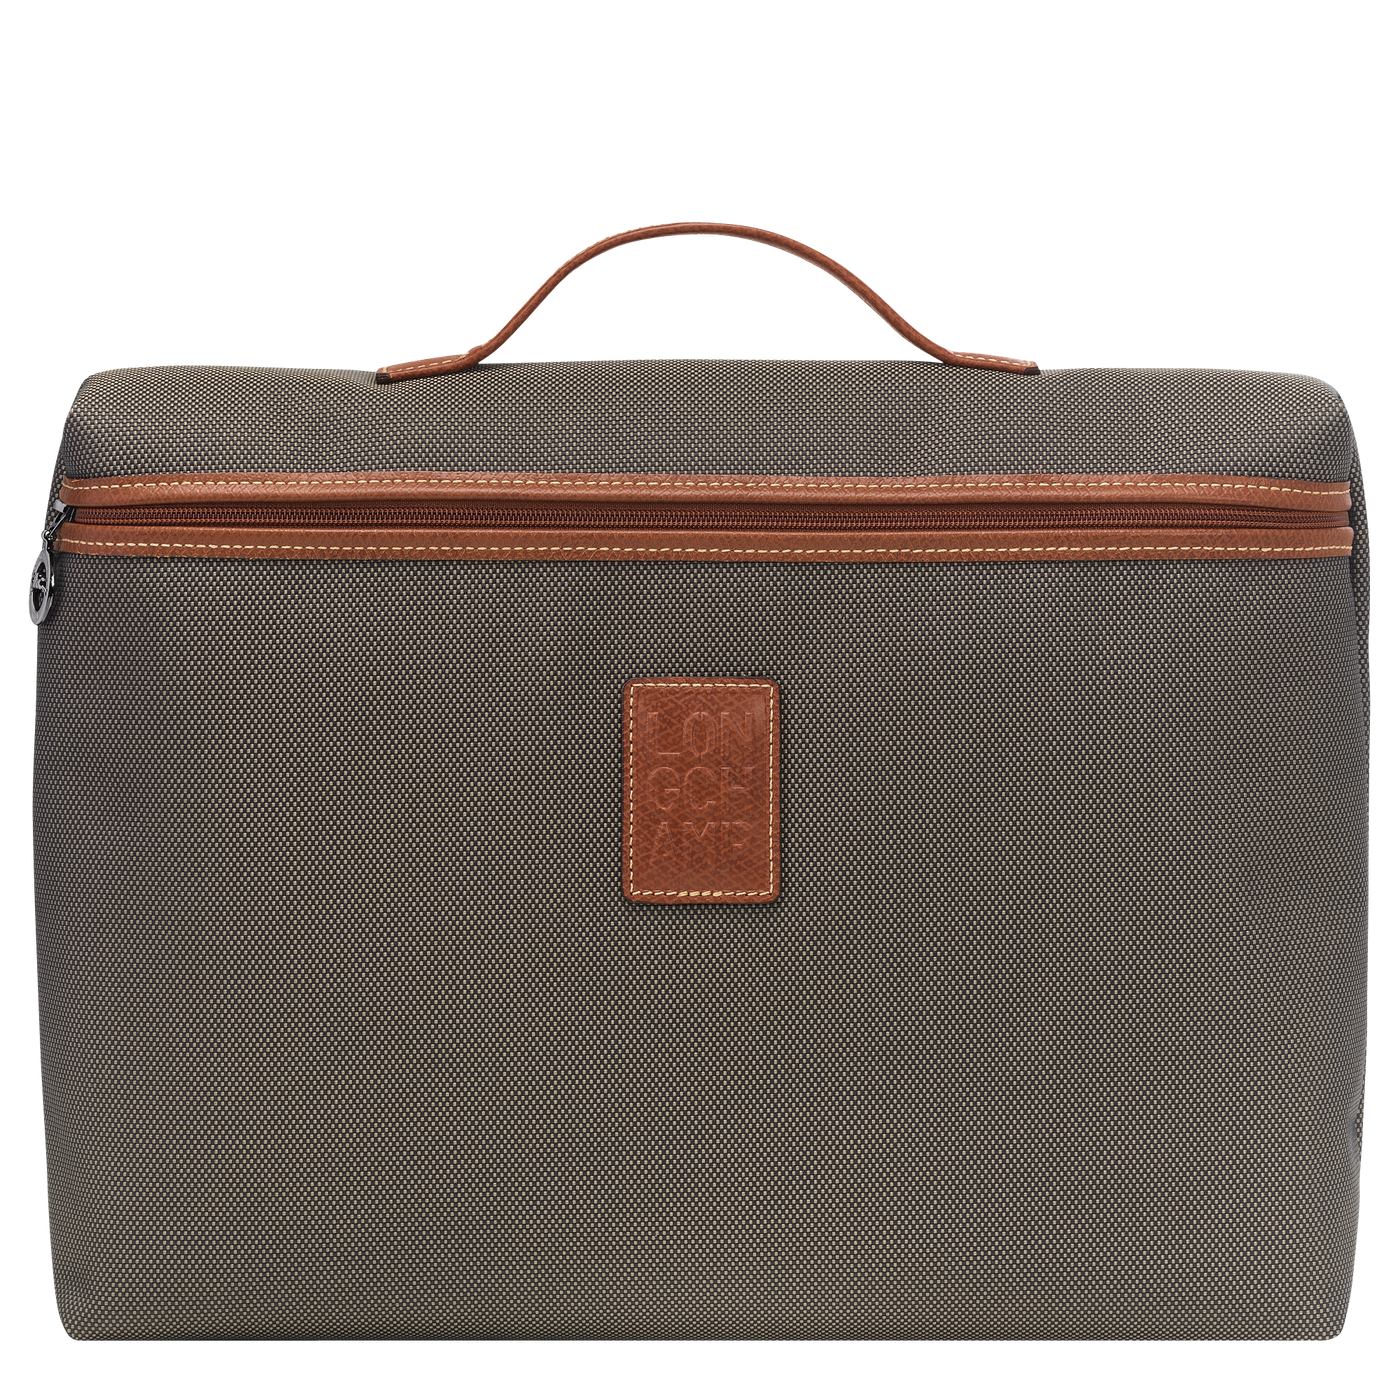 Shop The Latest Collection Of Longchamp Boxford Briefcase S - L2182080 In Lebanon